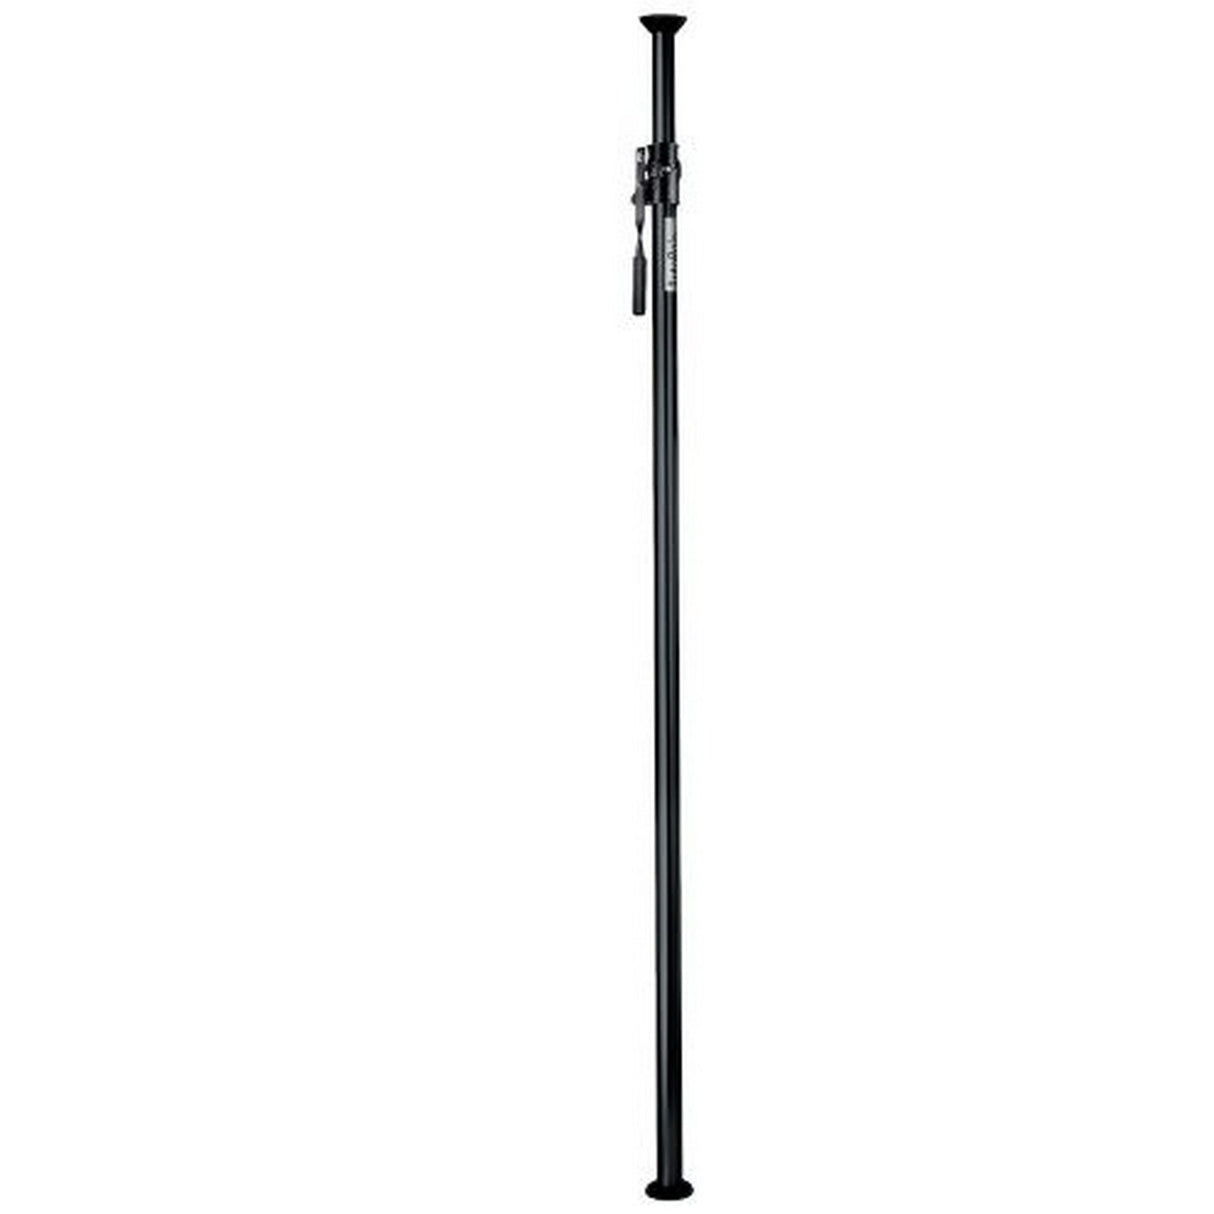 Manfrotto 032B Autopole Extends from 210-370 Centimeters, Black